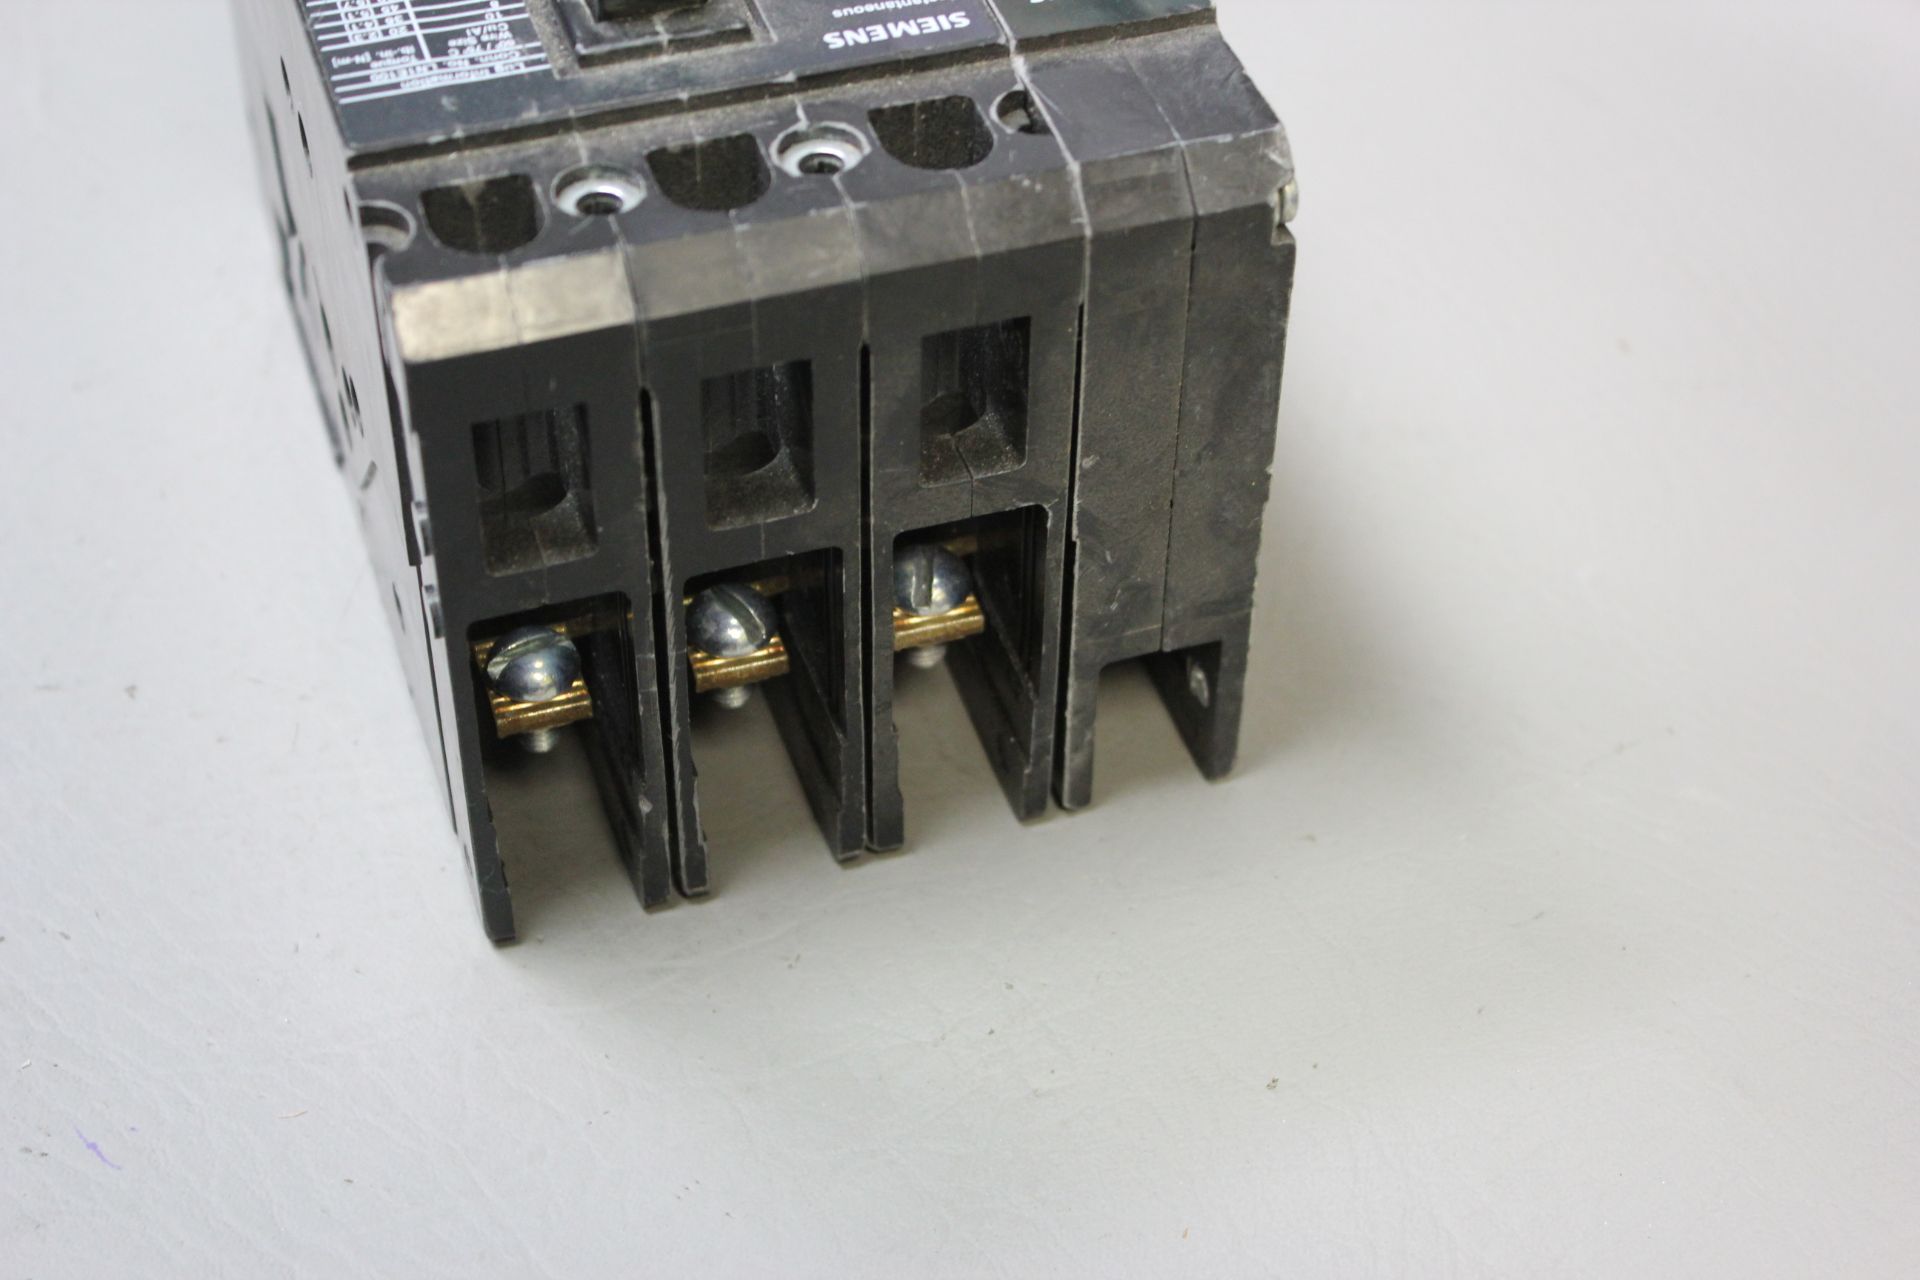 SIEMENS 3A CIRCUIT BREAKER WITH ACCESSORY - Image 4 of 7